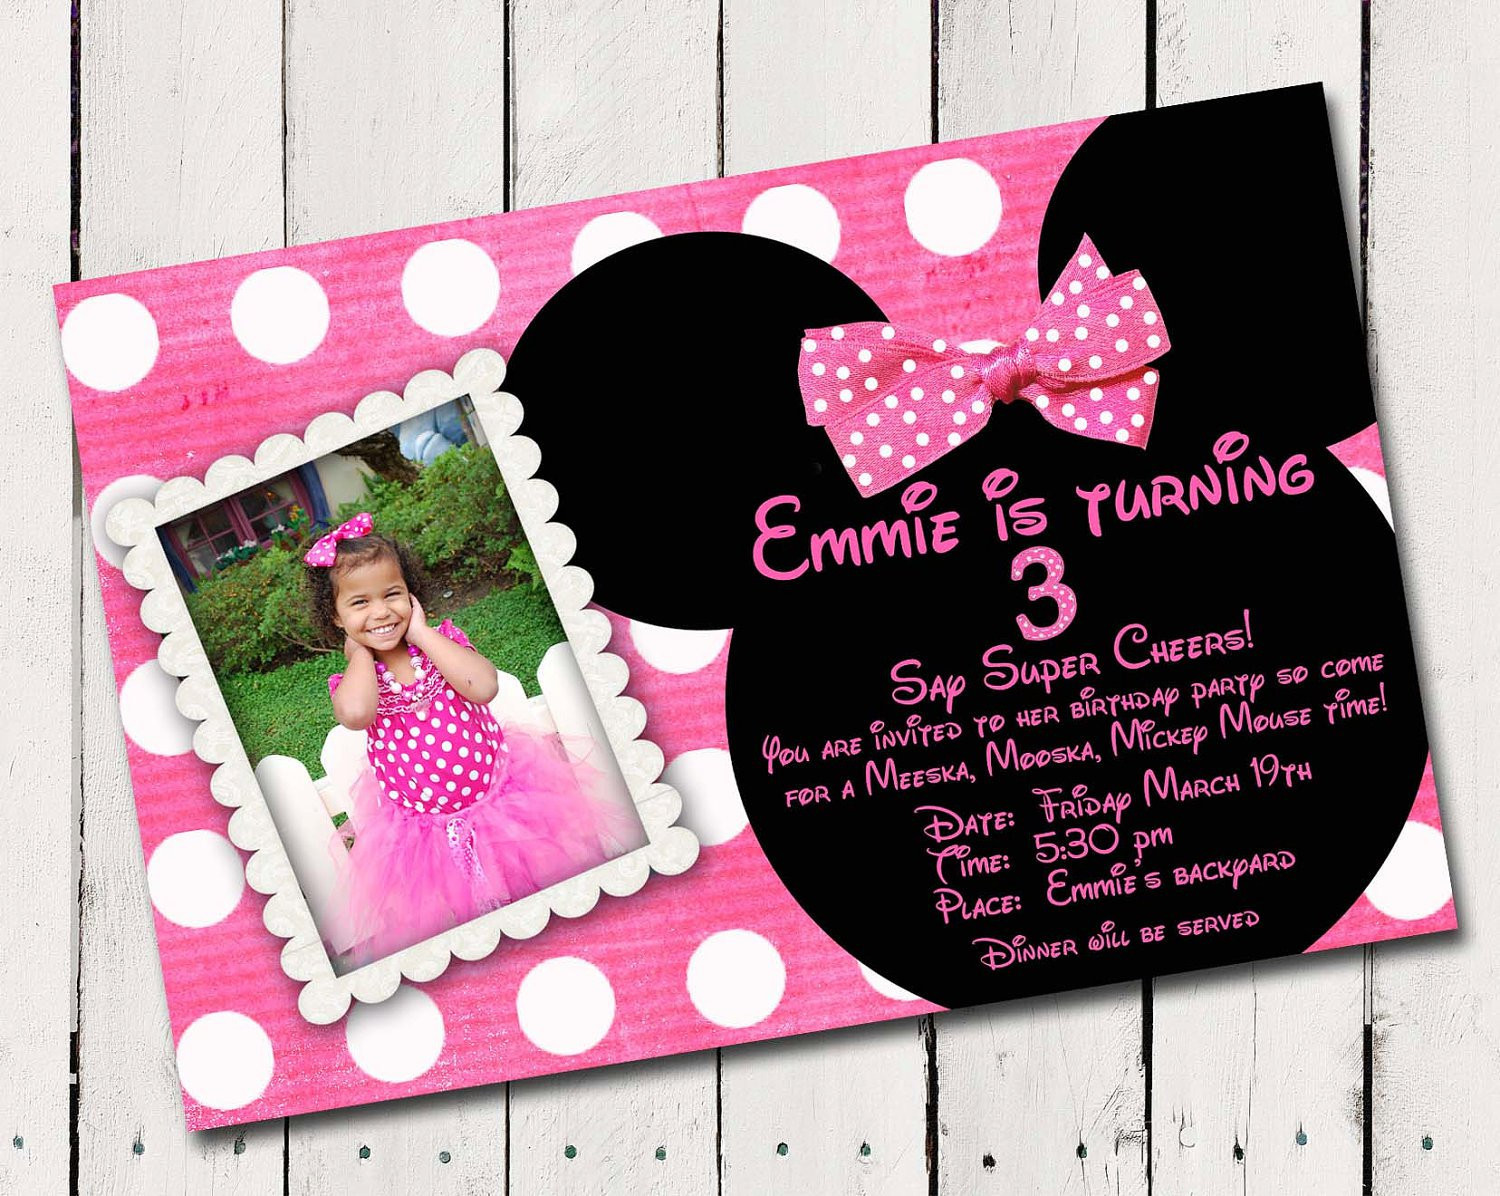 Minnie Mouse Birthday Invitations Personalized
 Custom Minnie Mouse Birthday Invitations